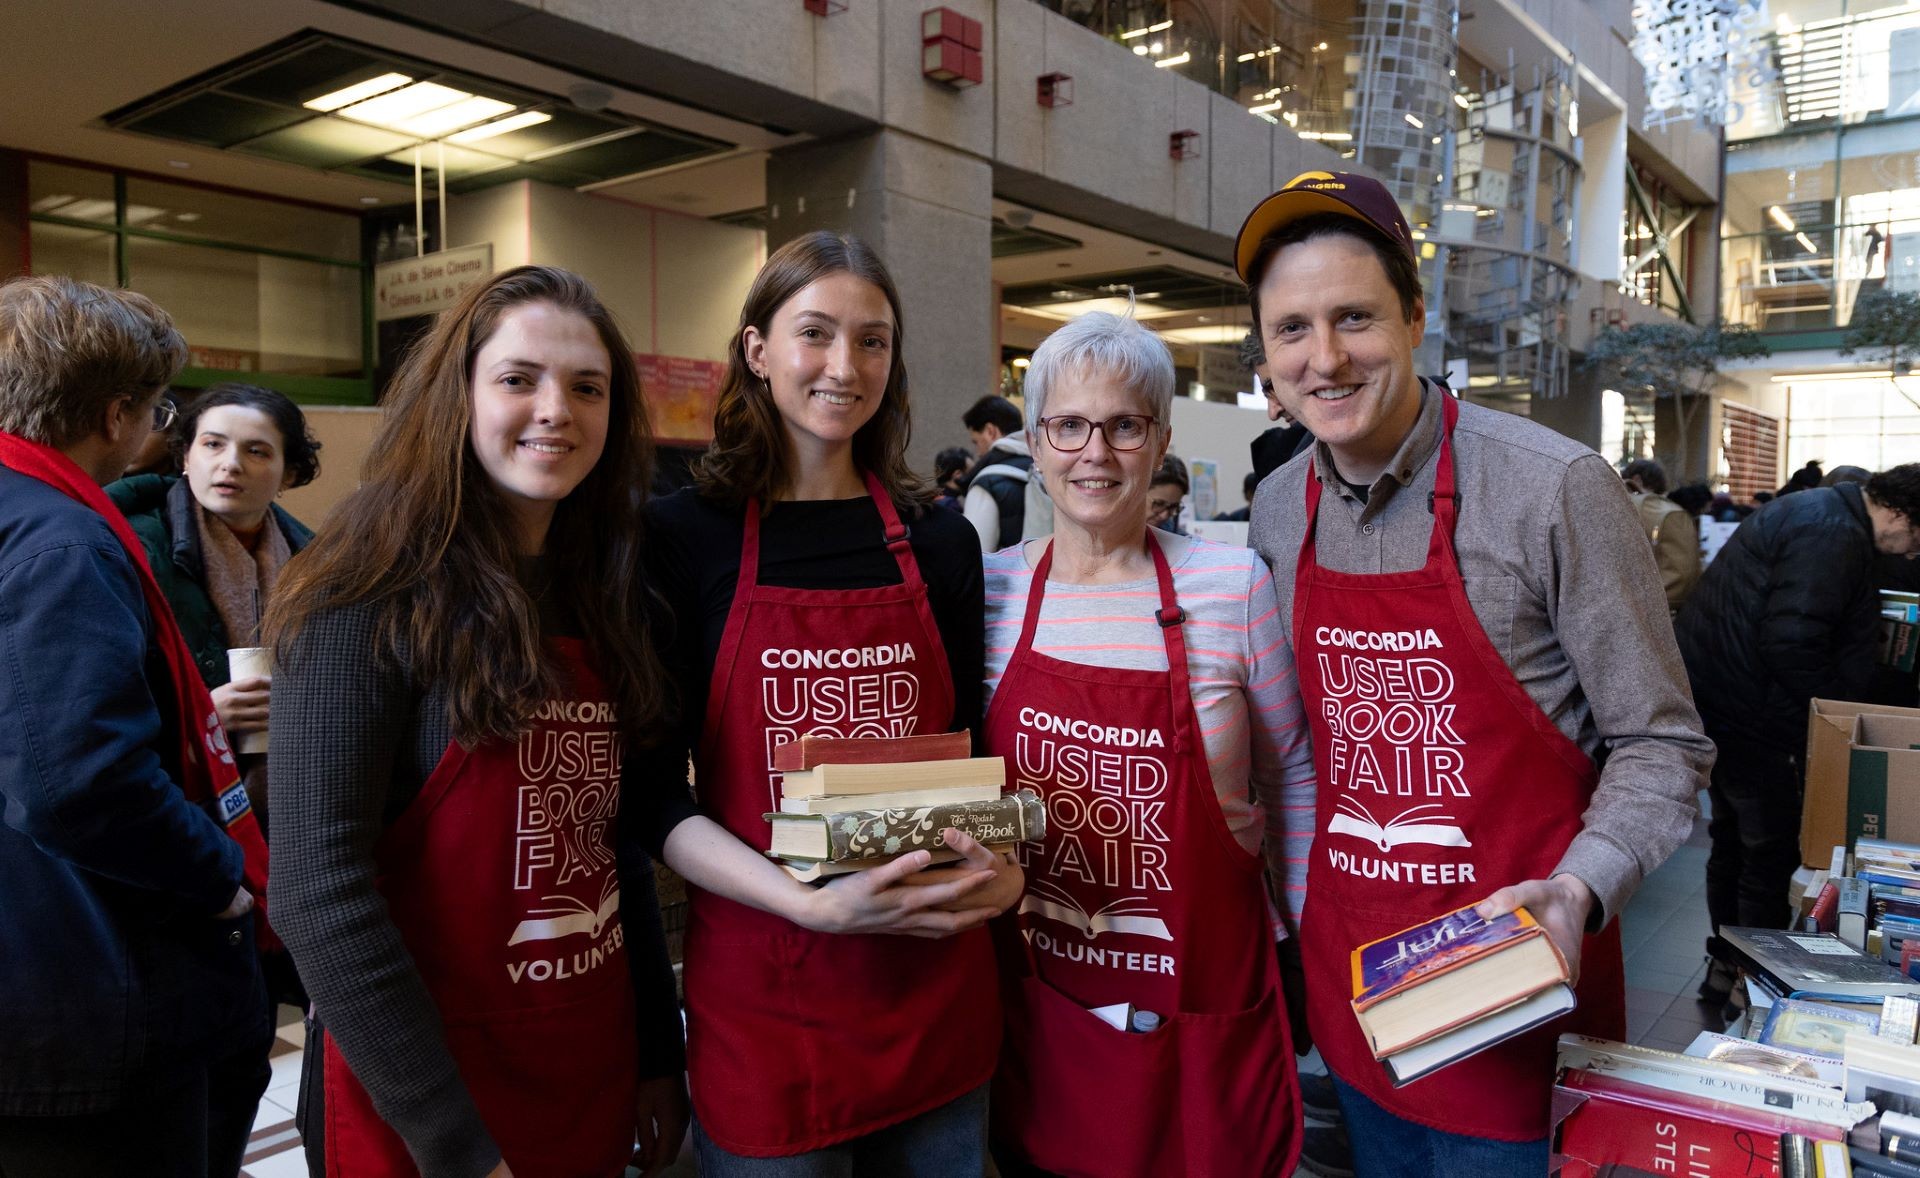 Four volunteers wearing red aprons with the text "Concordia Used Book Fair Volunteer" are smiling for the camera, holding a stack of books each, at an indoor book fair with other attendees in the background.